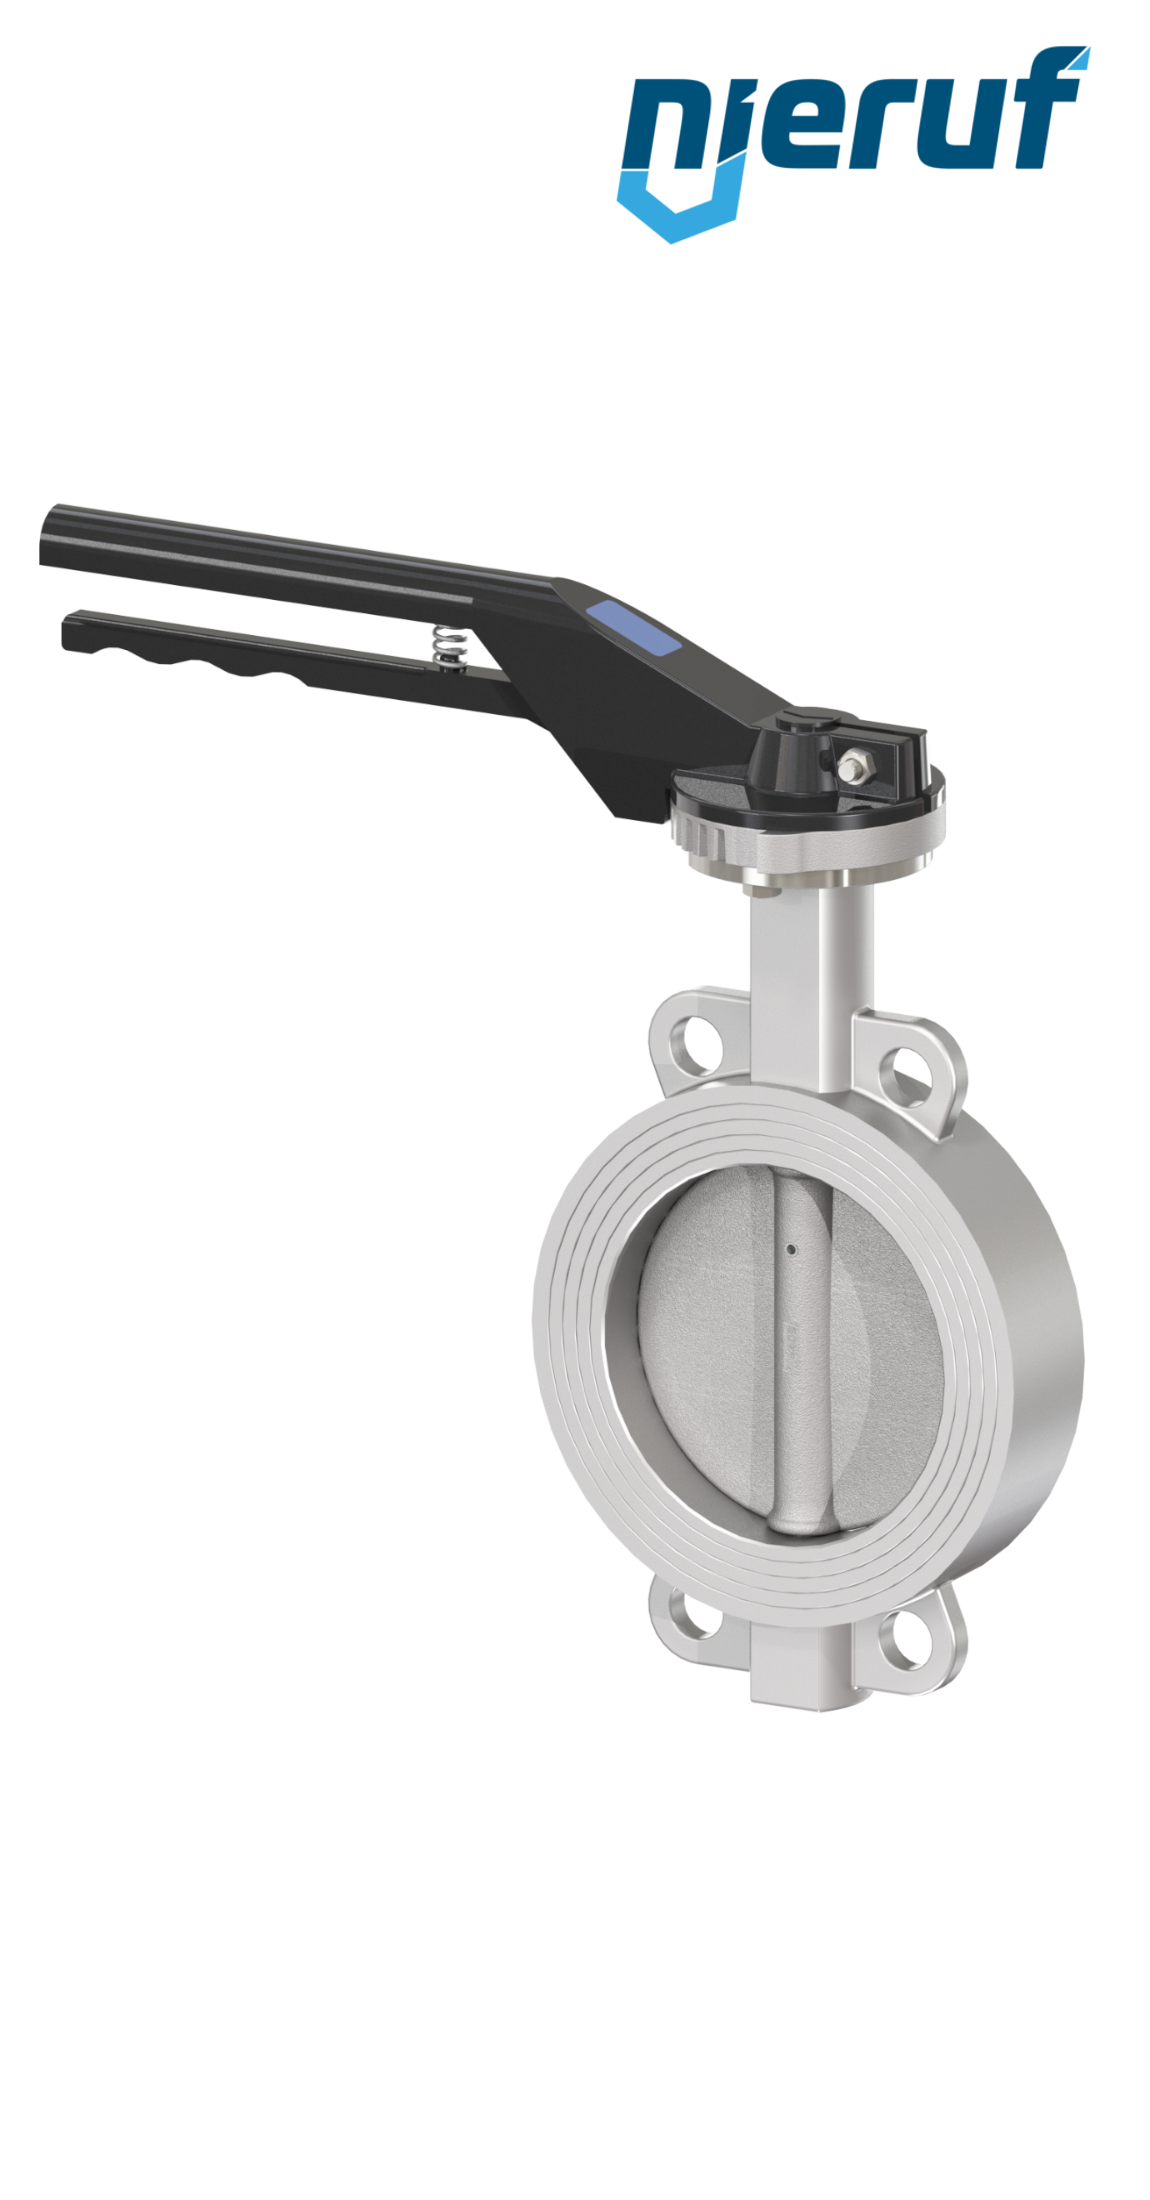 Butterfly-valve-stainless-steel DN 150 PN16 AK08 metall notch lever